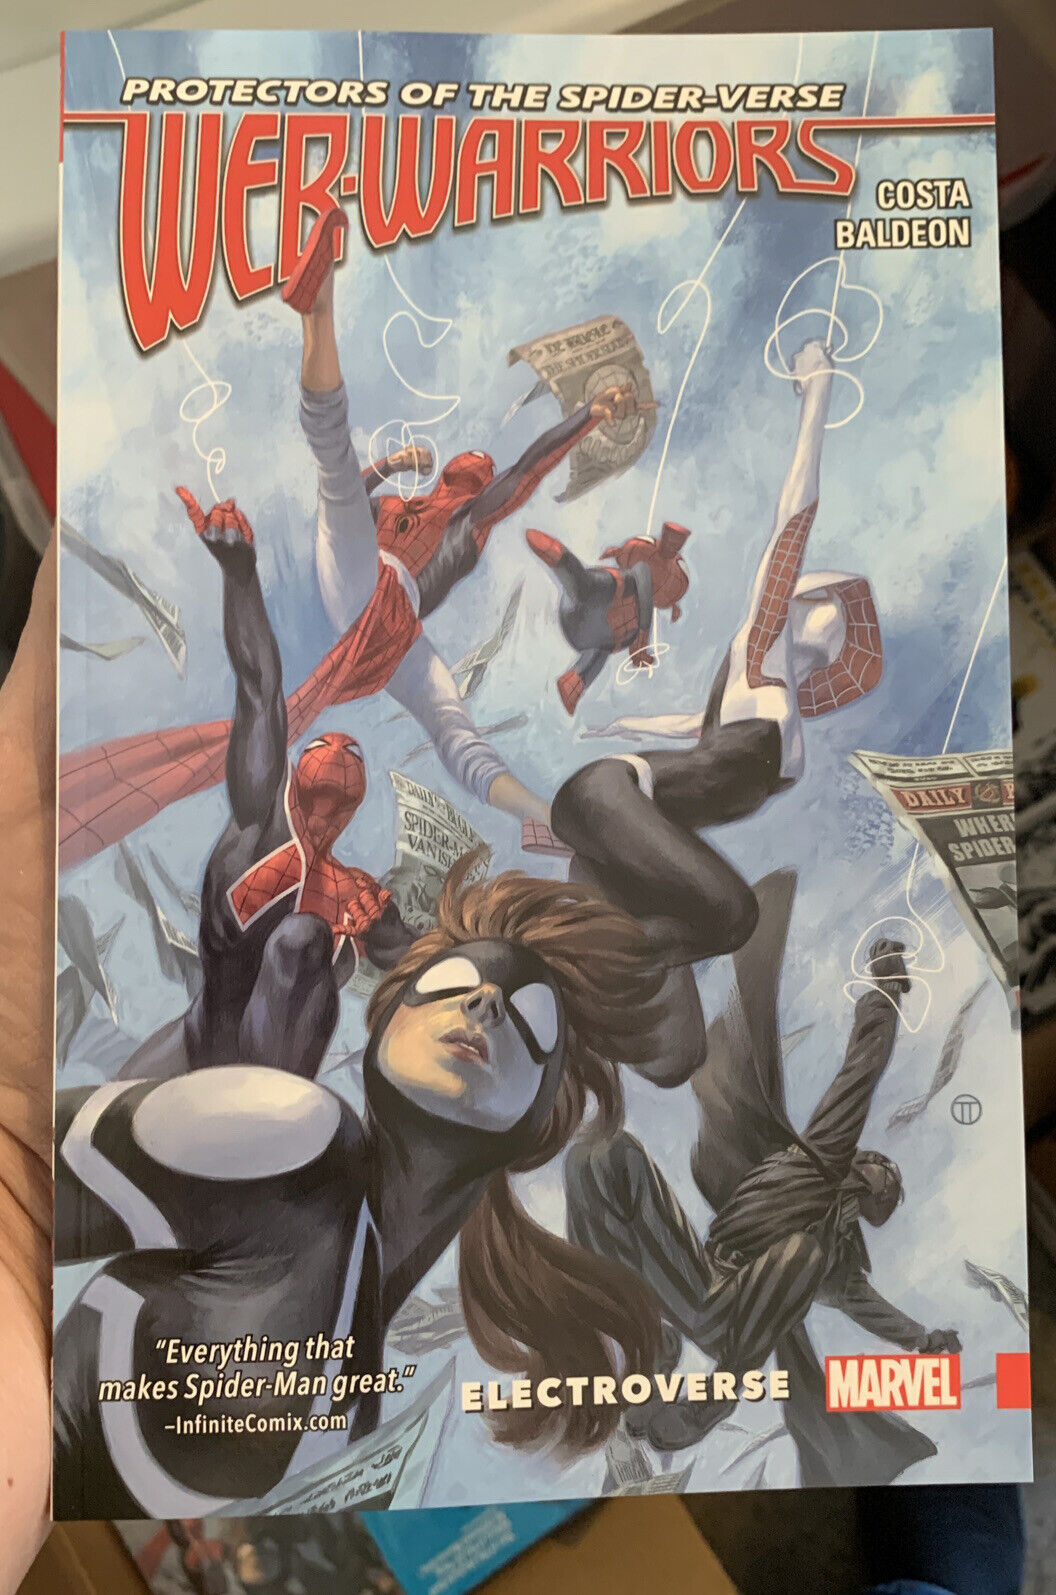 Web Warriors of the Spider-Verse Vol. 1: Electroverse Comic Novel Spider Man